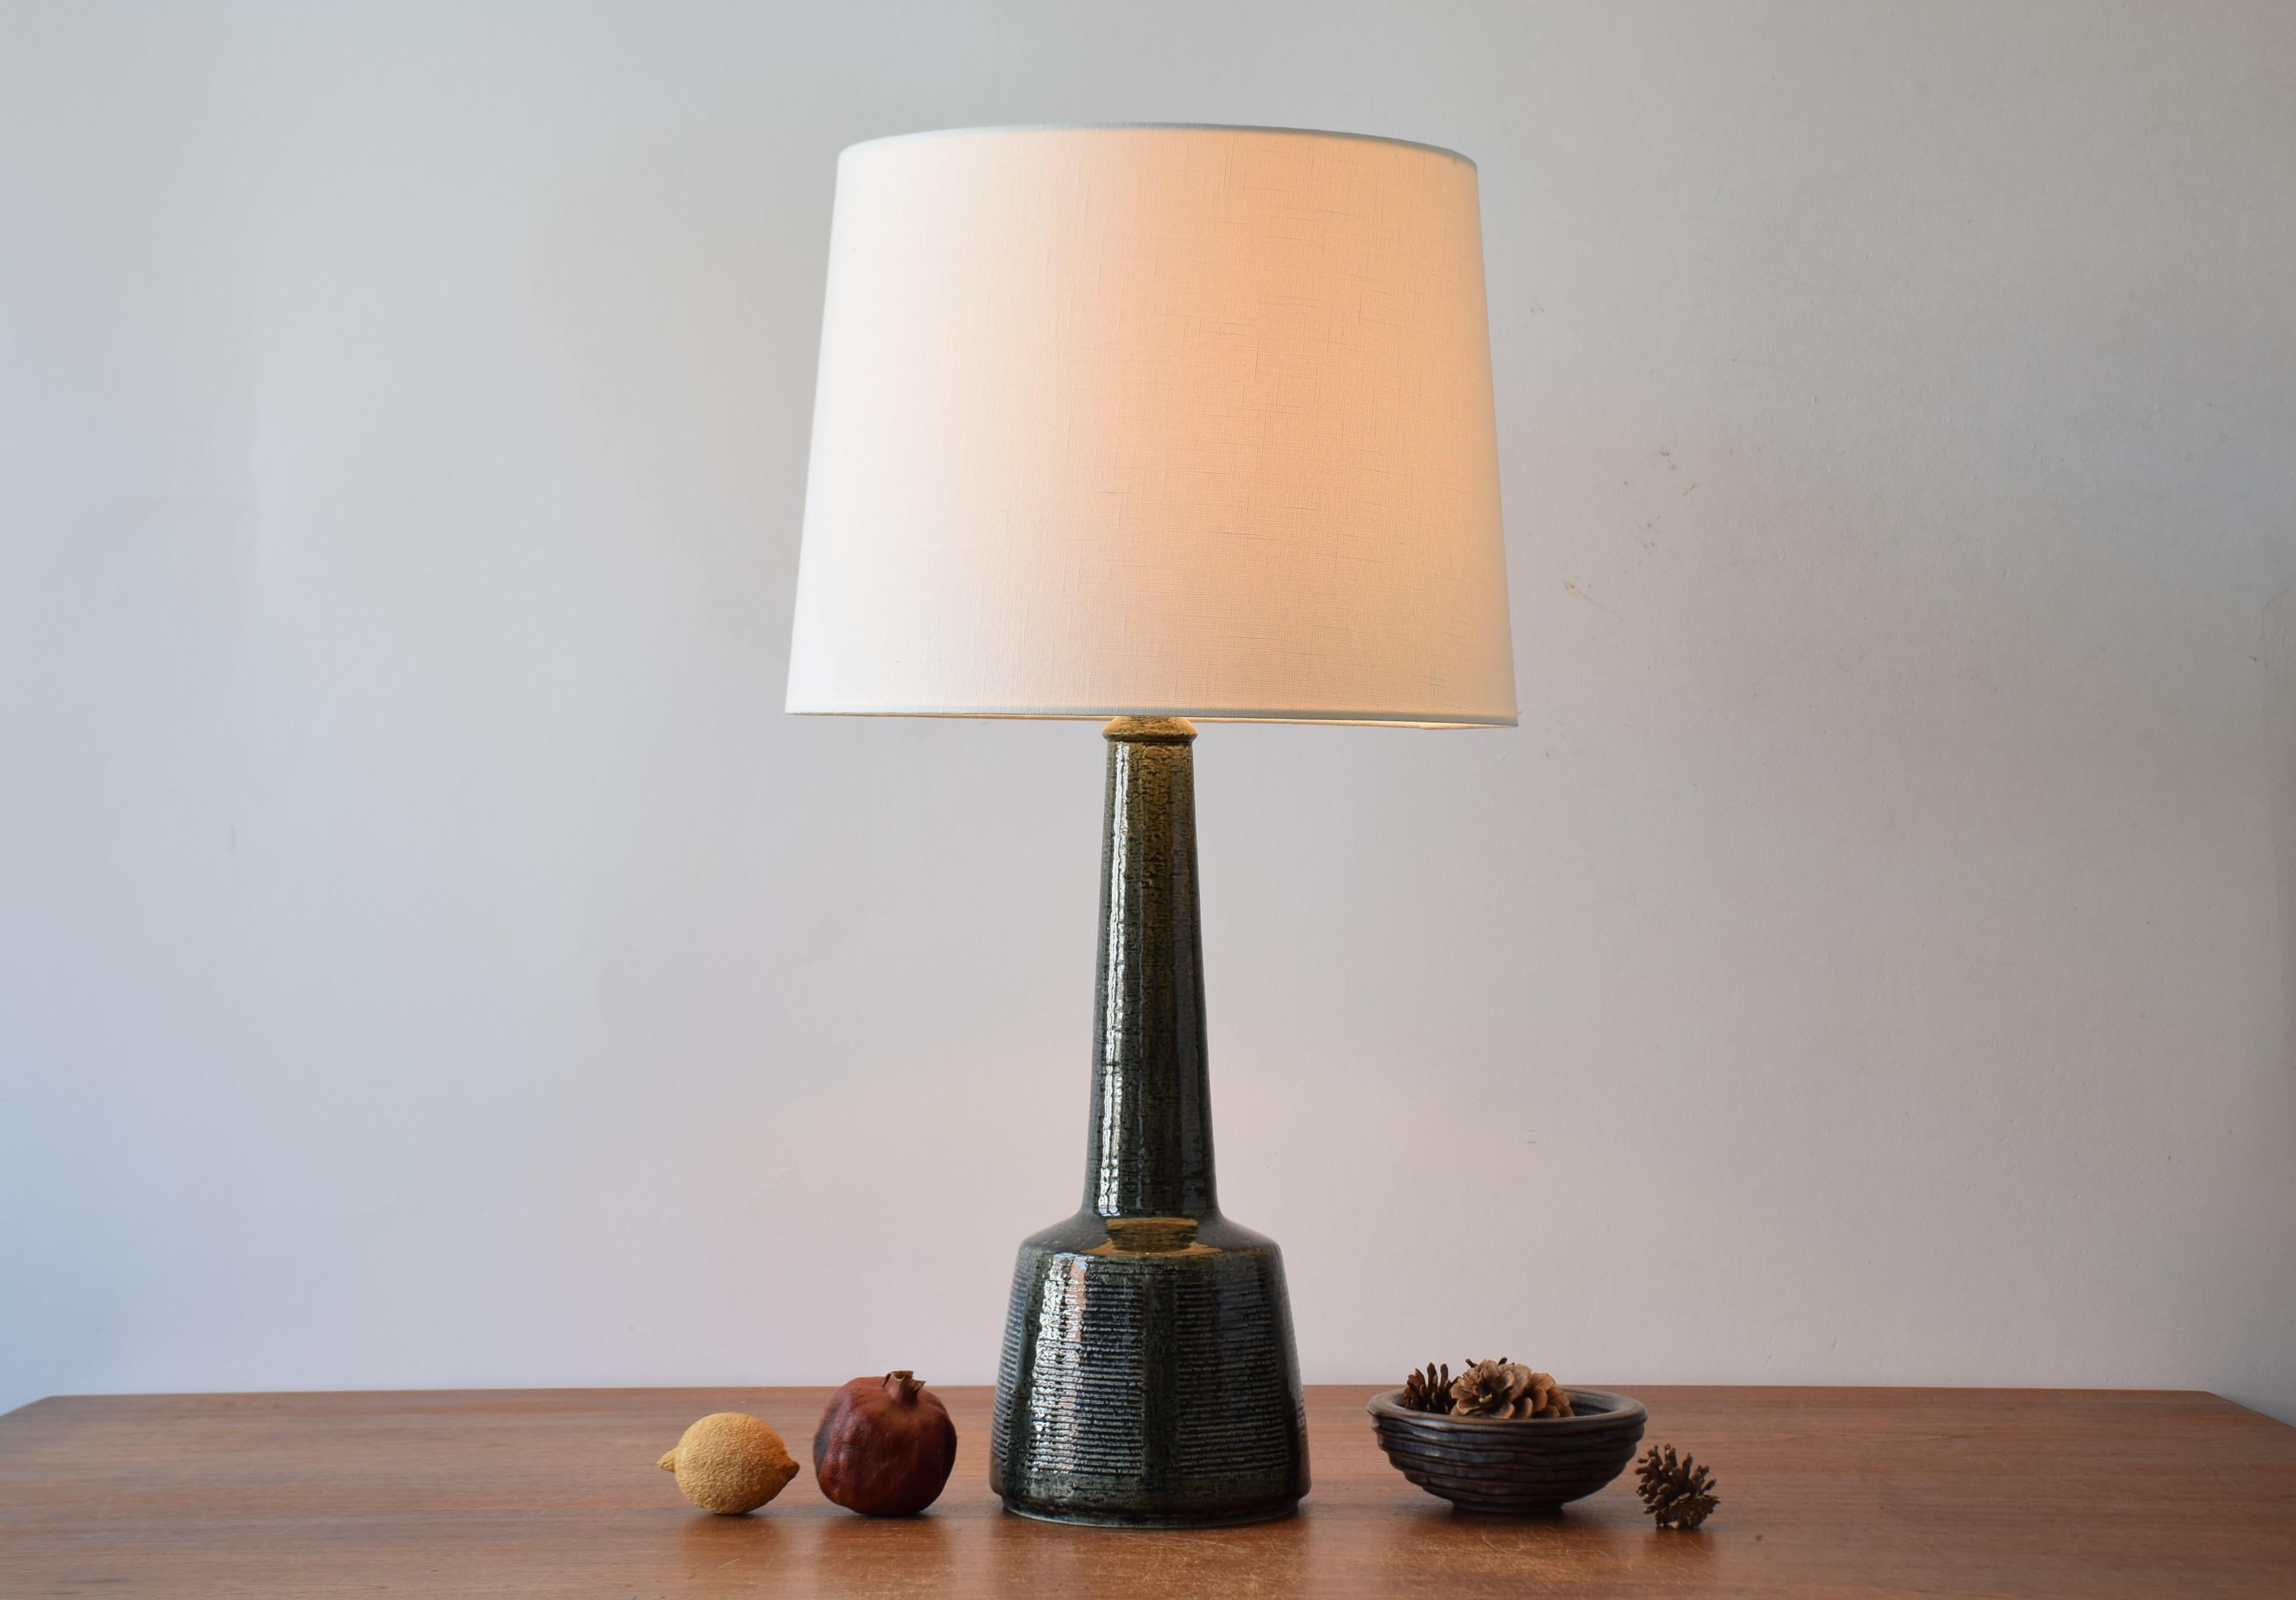 Vintage Palshus Denmark tall ceramic table lamp including new quality lampshade.

The lamp was made in cooperation with the Danish lamp manufacturer Le Klint and designed by Esben Klint. It was manufactured circa 1960s. The lamp has a bottle green